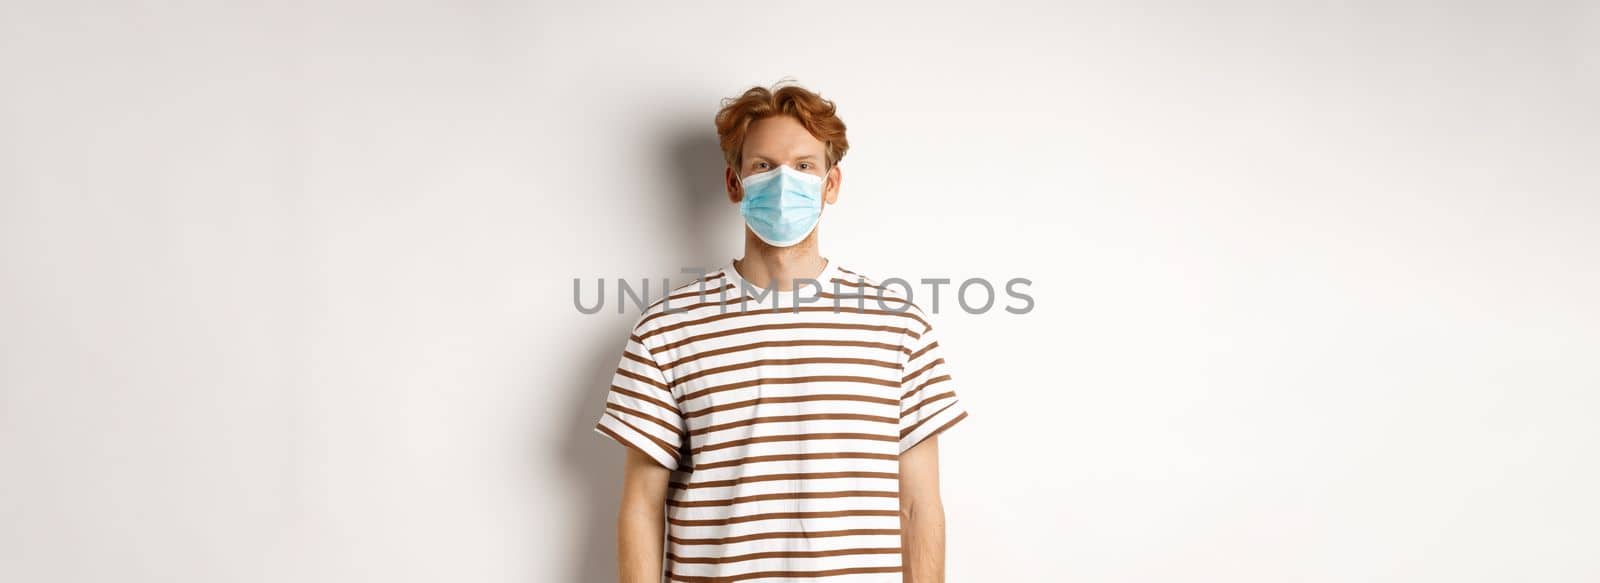 Covid-19, pandemic and social distancing concept. Young man with red hair wearing medical mask to prevent catching coronavirus, white background.